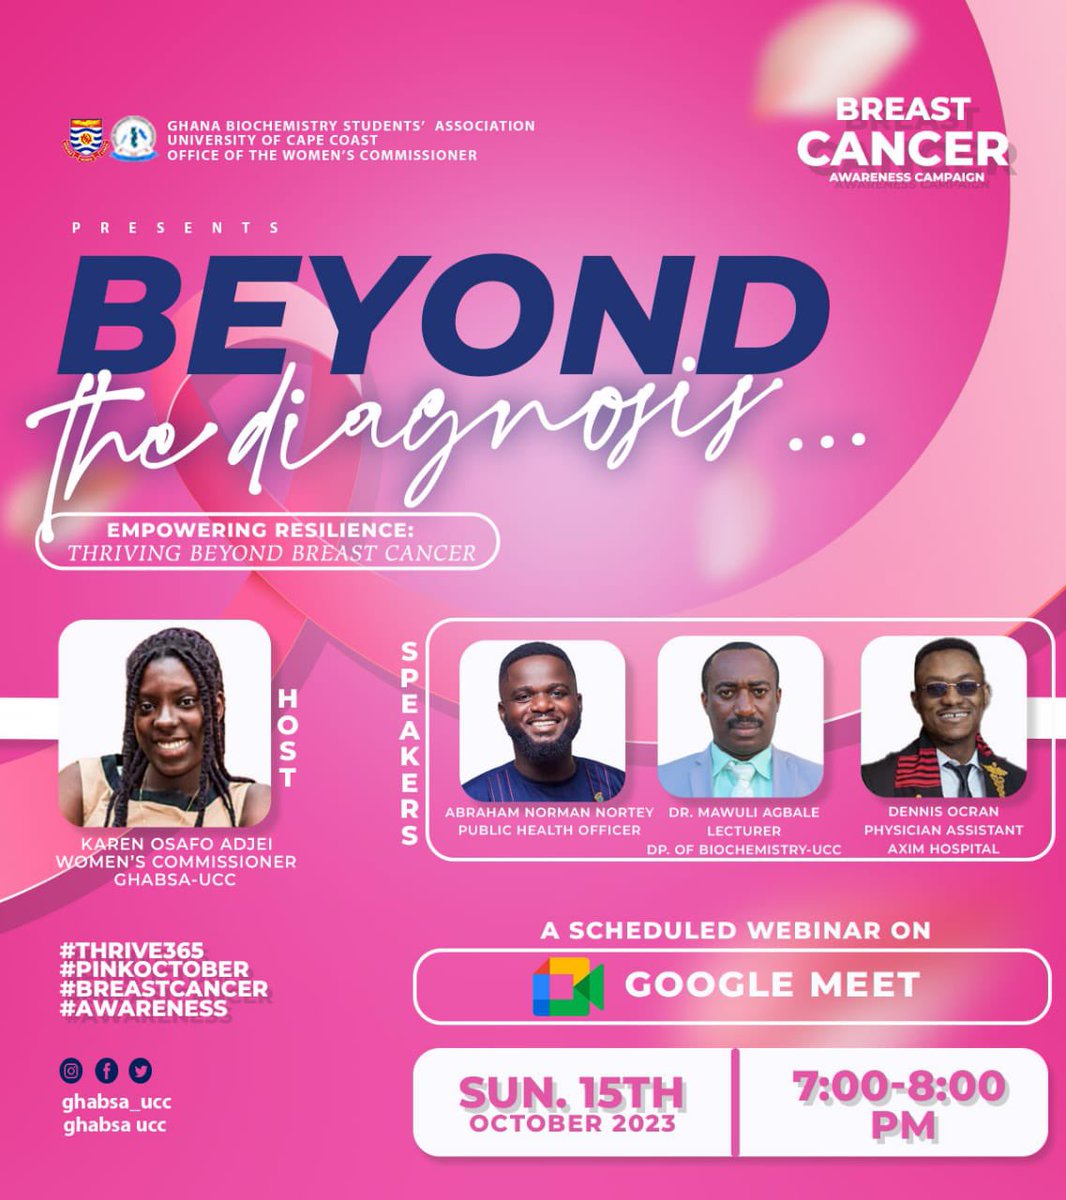 Save the Date. Join @GHABSA_UCC for an insightful webinar on the empowering theme 'Empowering Resilience: Thriving Beyond Breast Cancer' on Sunday, 15th October. It promises to be an inspiring session.
💗💕🌟💪🎗️ #Thrive365 #Pinktober #BreastCancerAwareness #Webinar #GHABSAUCC